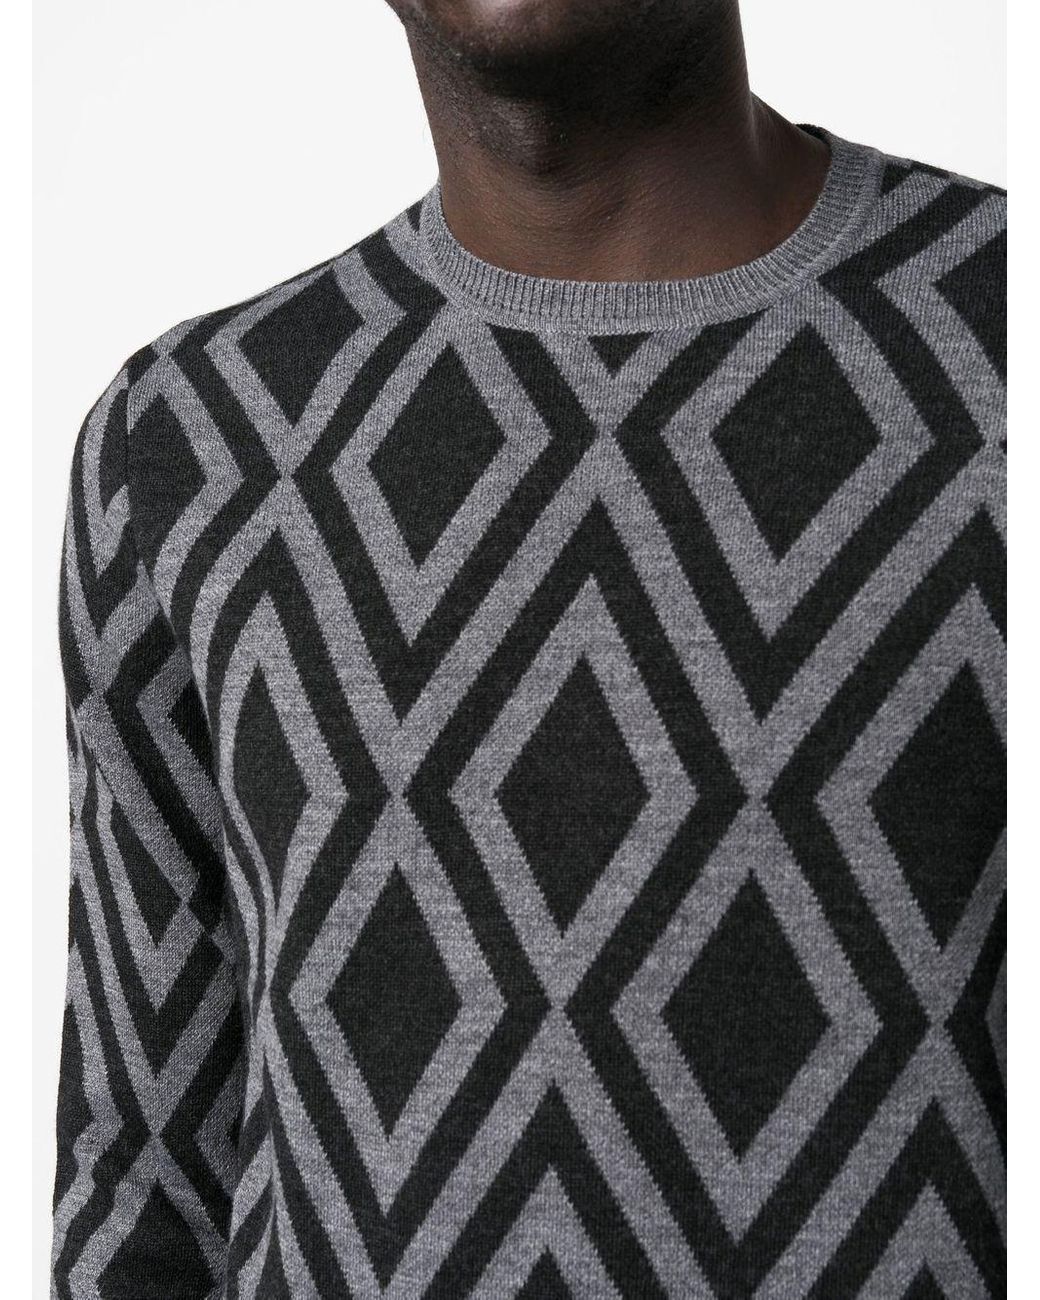 Cropped Cardigan With Jacquard Chevron Knit by Emporio Armani at